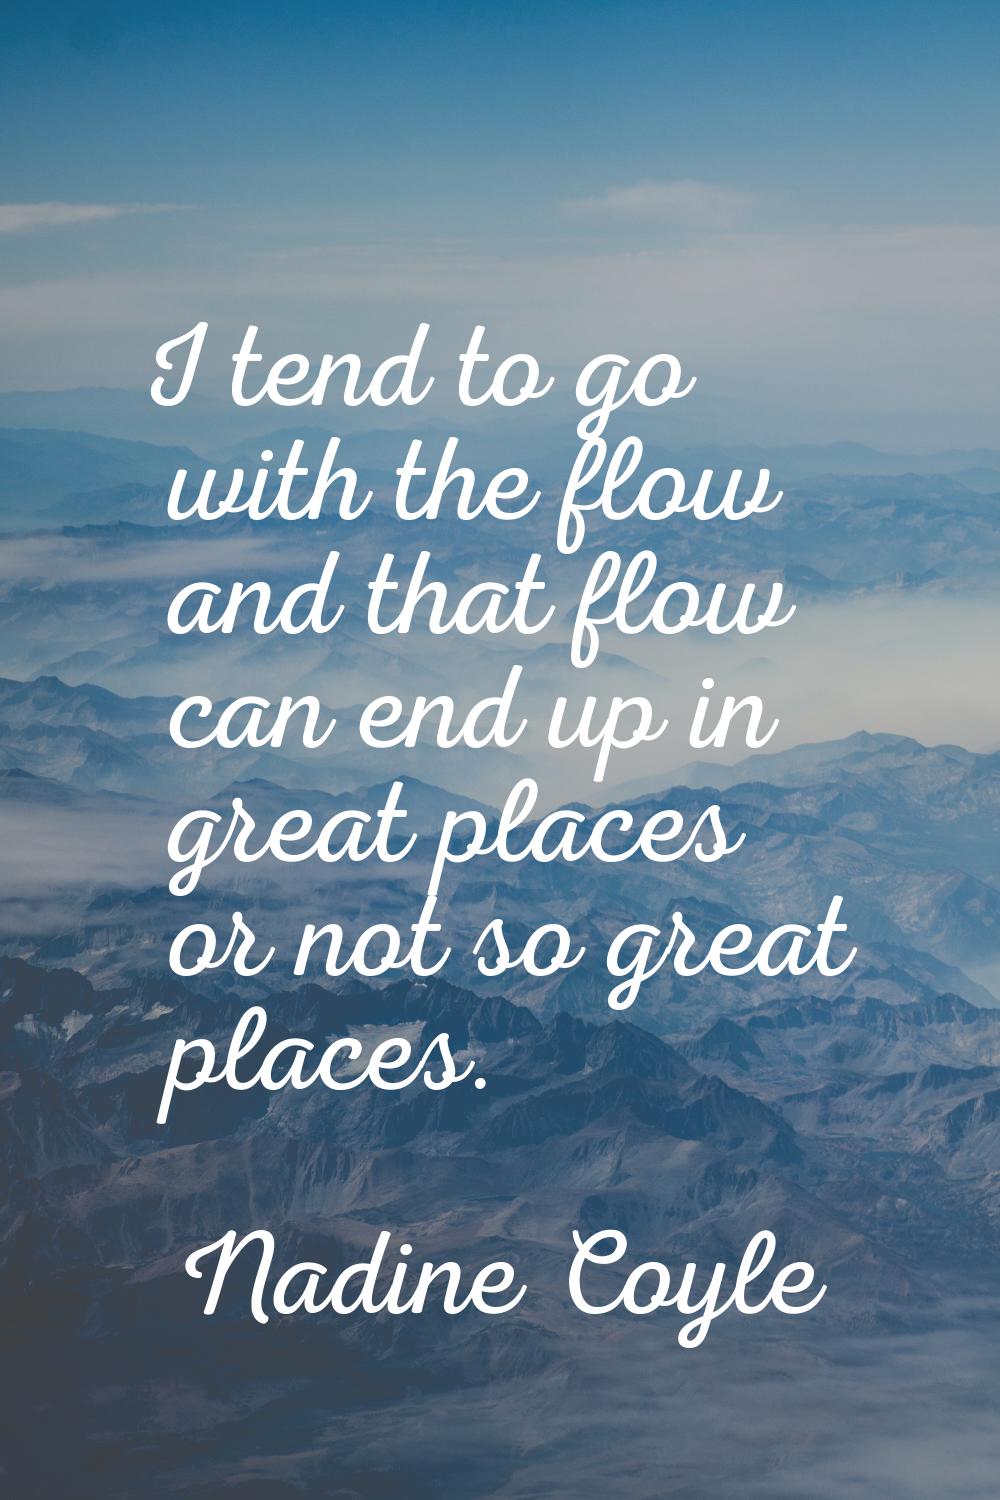 I tend to go with the flow and that flow can end up in great places or not so great places.